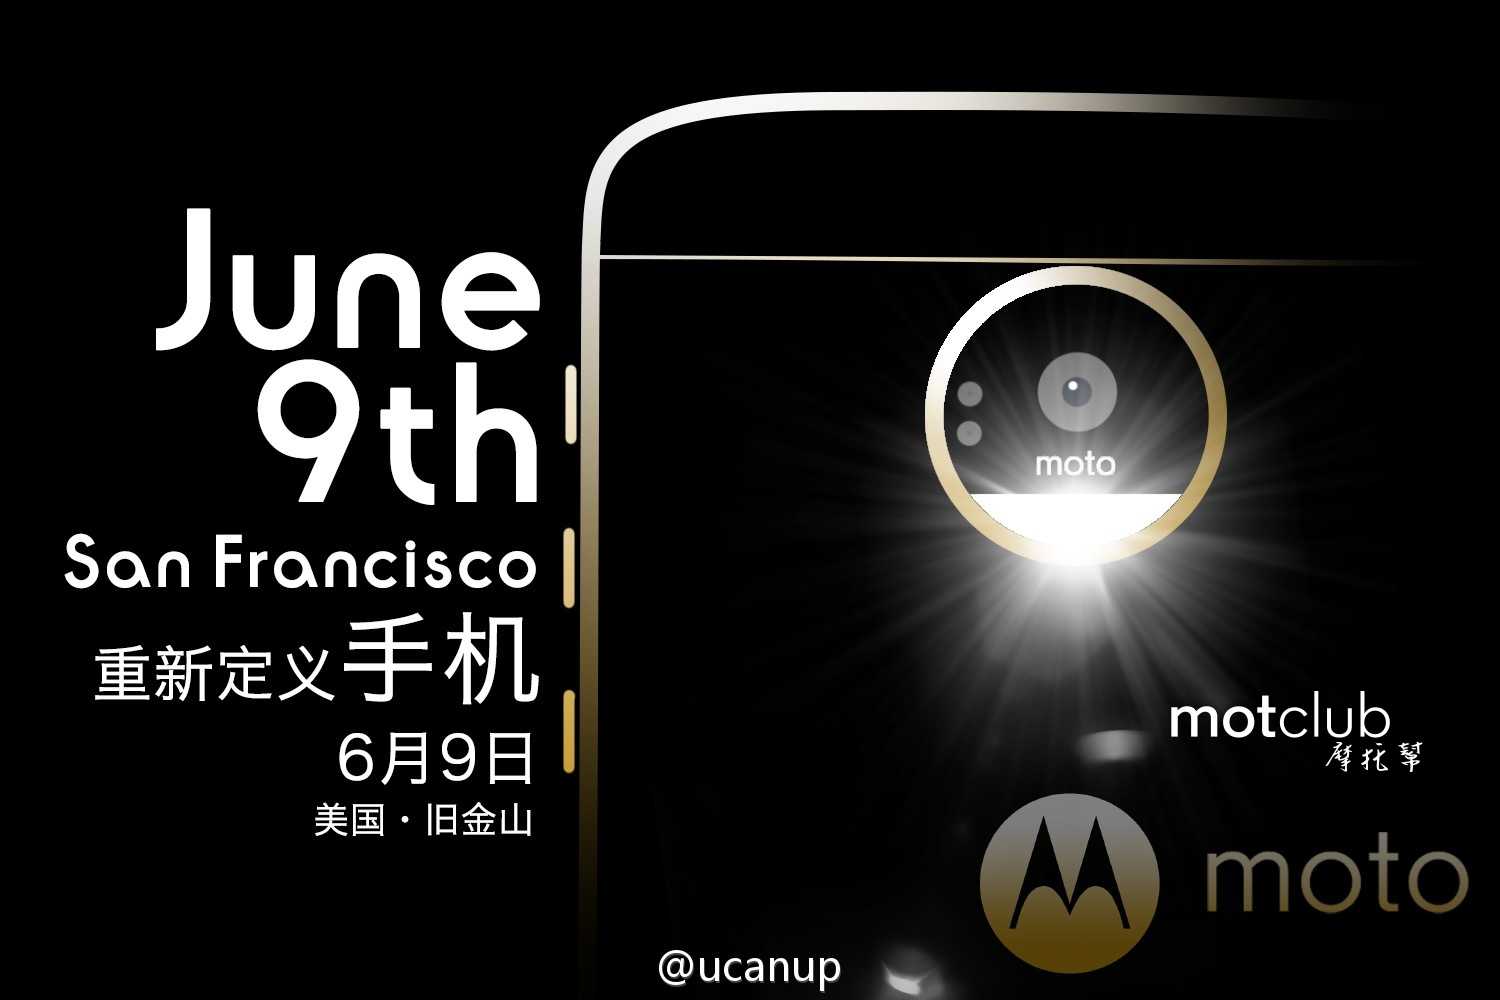 Moto Z leaked images and Specification